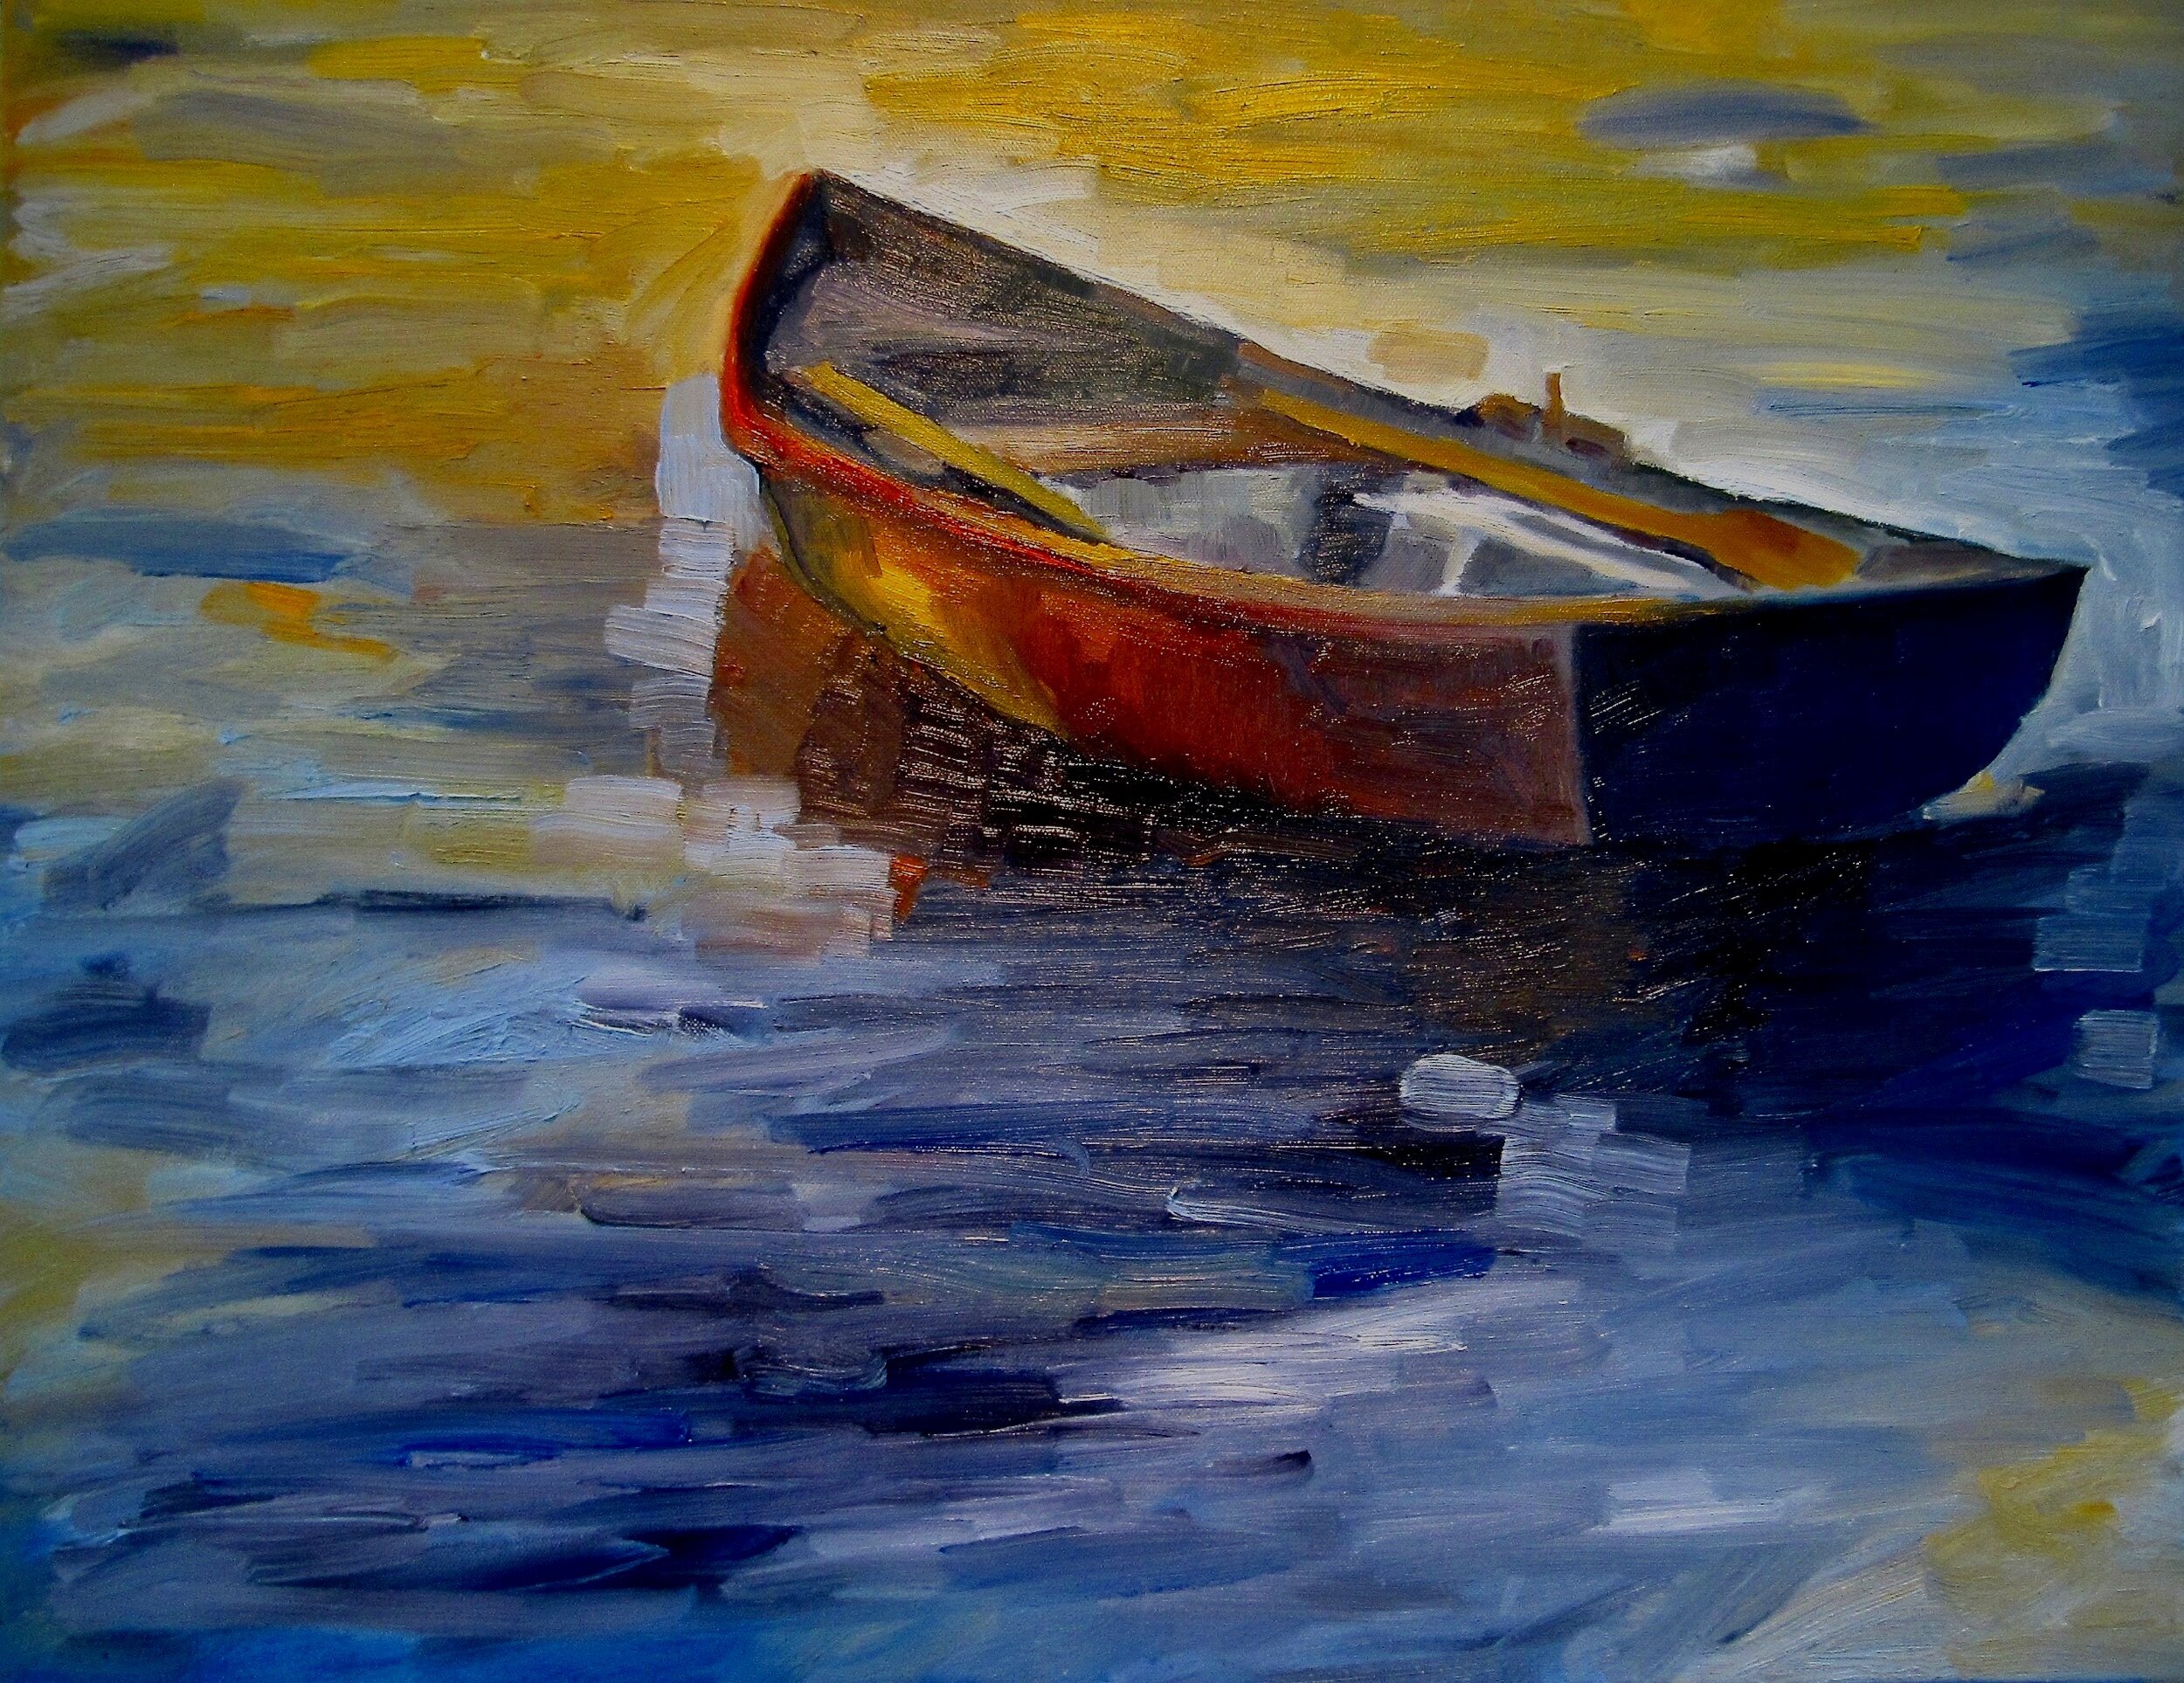 Boat with yellow, 2018